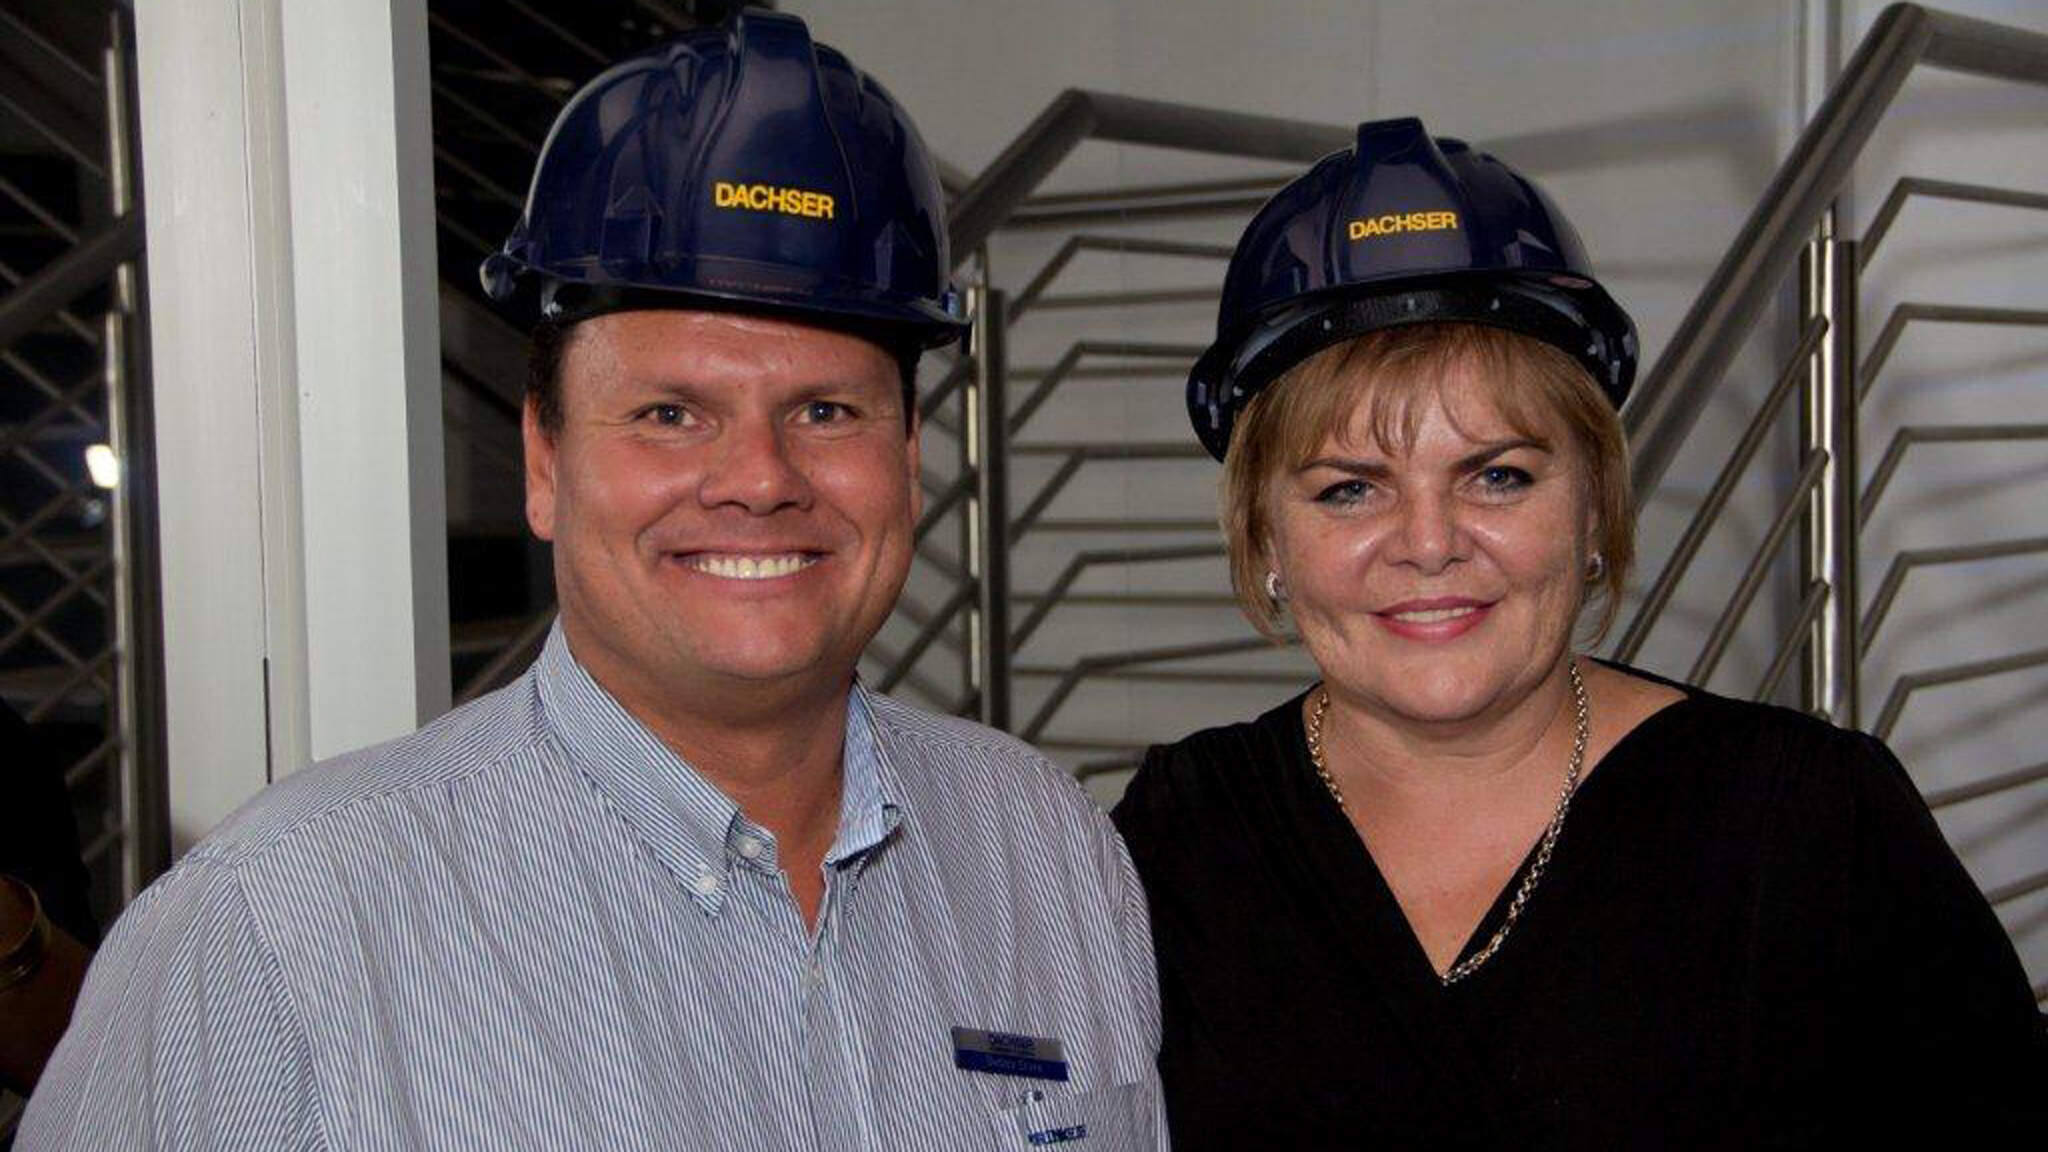 From left: Detlev Duve, Managing Director DACHSER South Africa, and Sera Fineberg, Branch Manager Air and Sea Logistics DACHSER South Africa